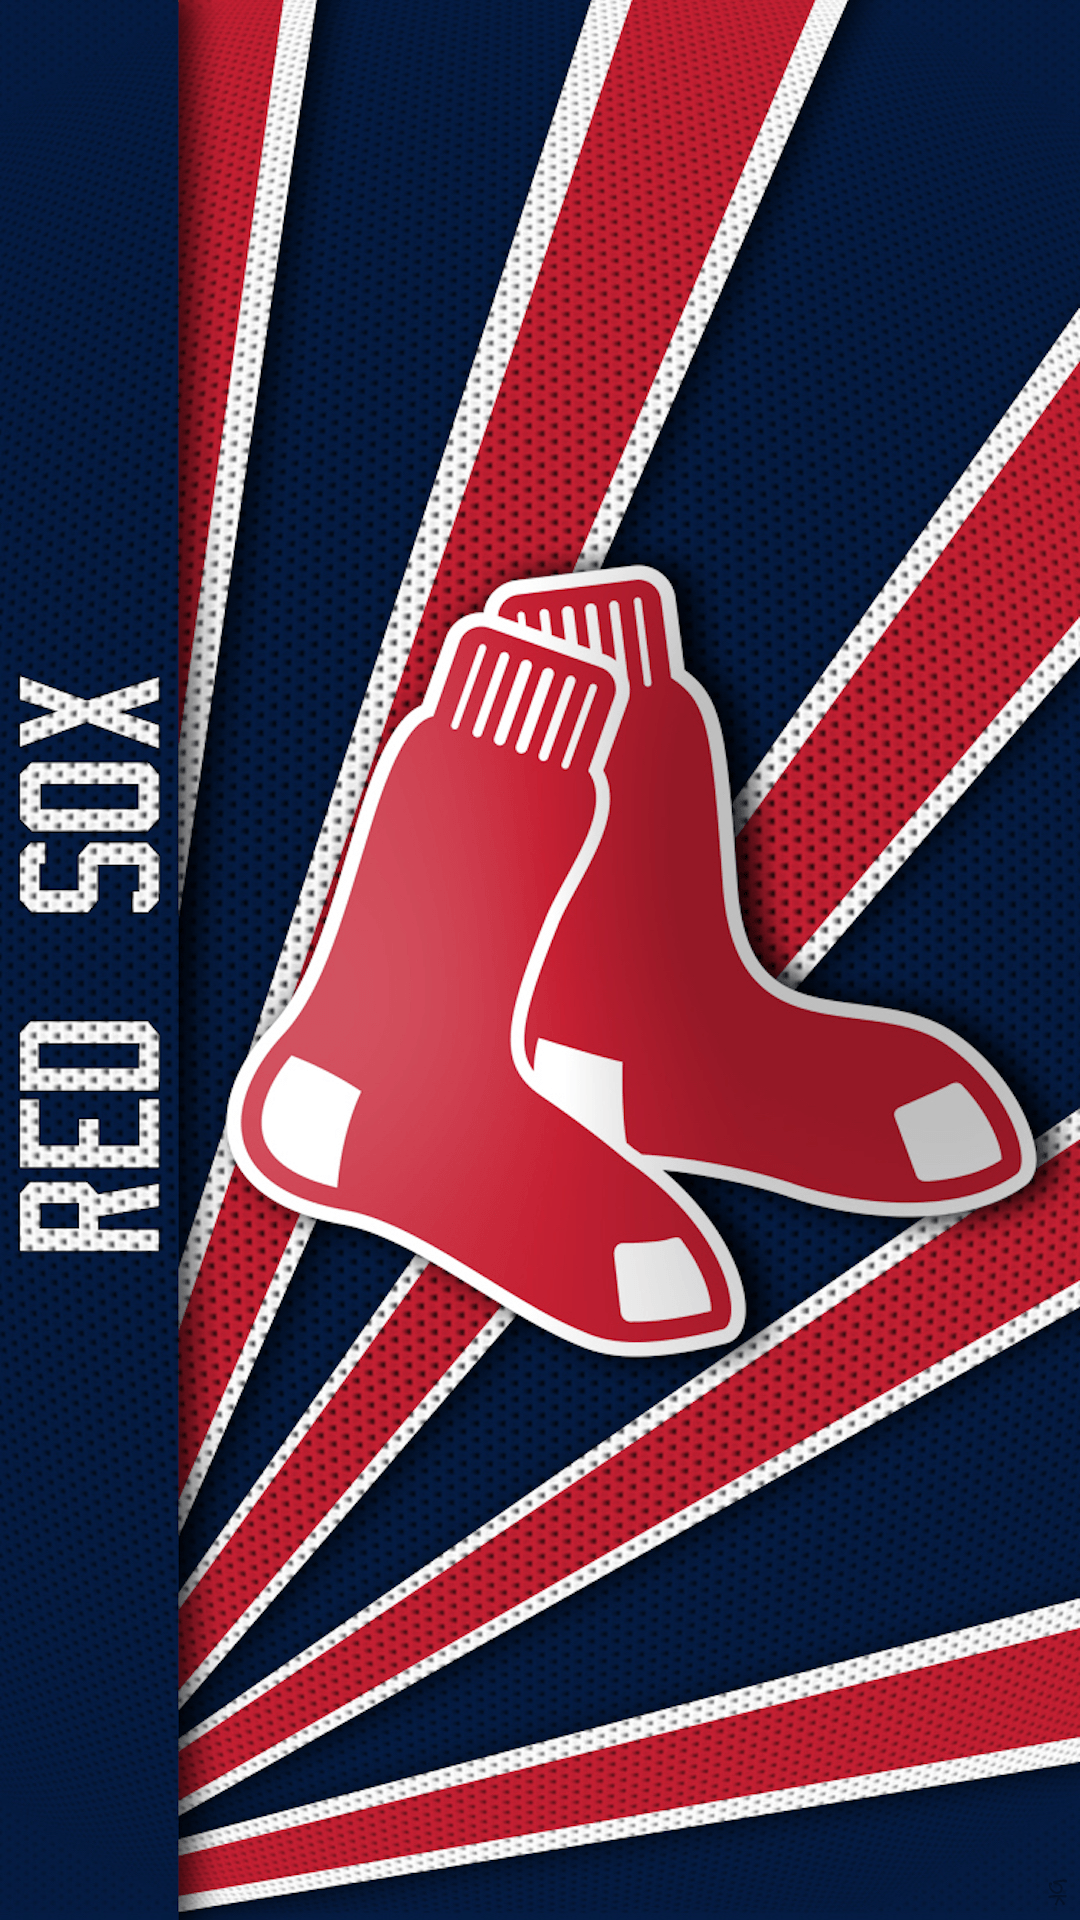 Boston Red Sox iPhone Wallpaper Free Boston Red Sox iPhone